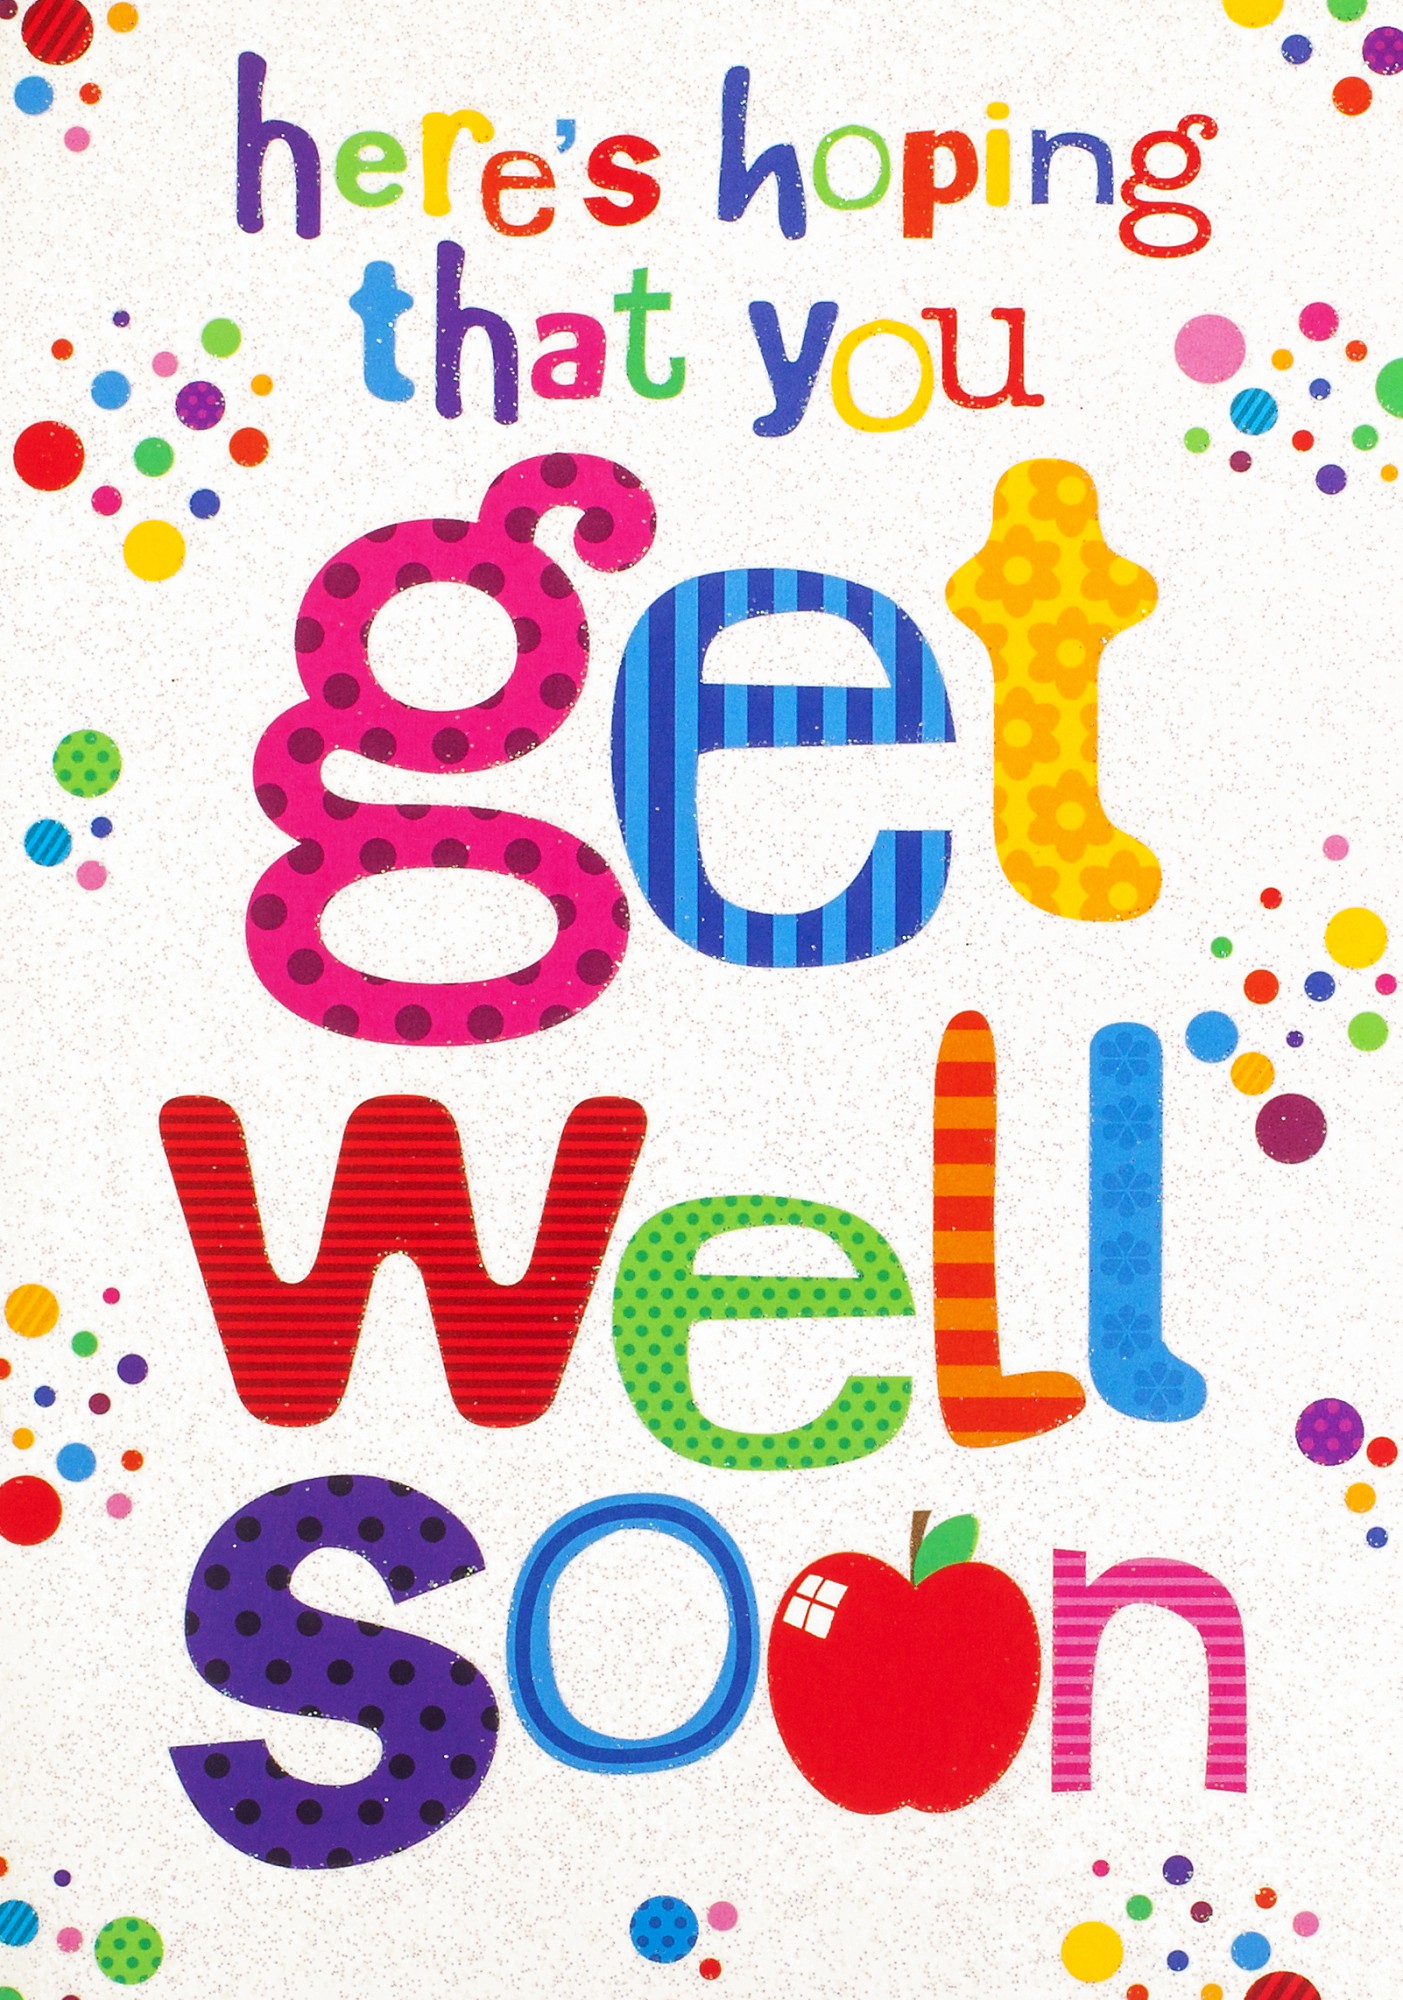 Get Well Male Greeting Cards - LP Wholesale